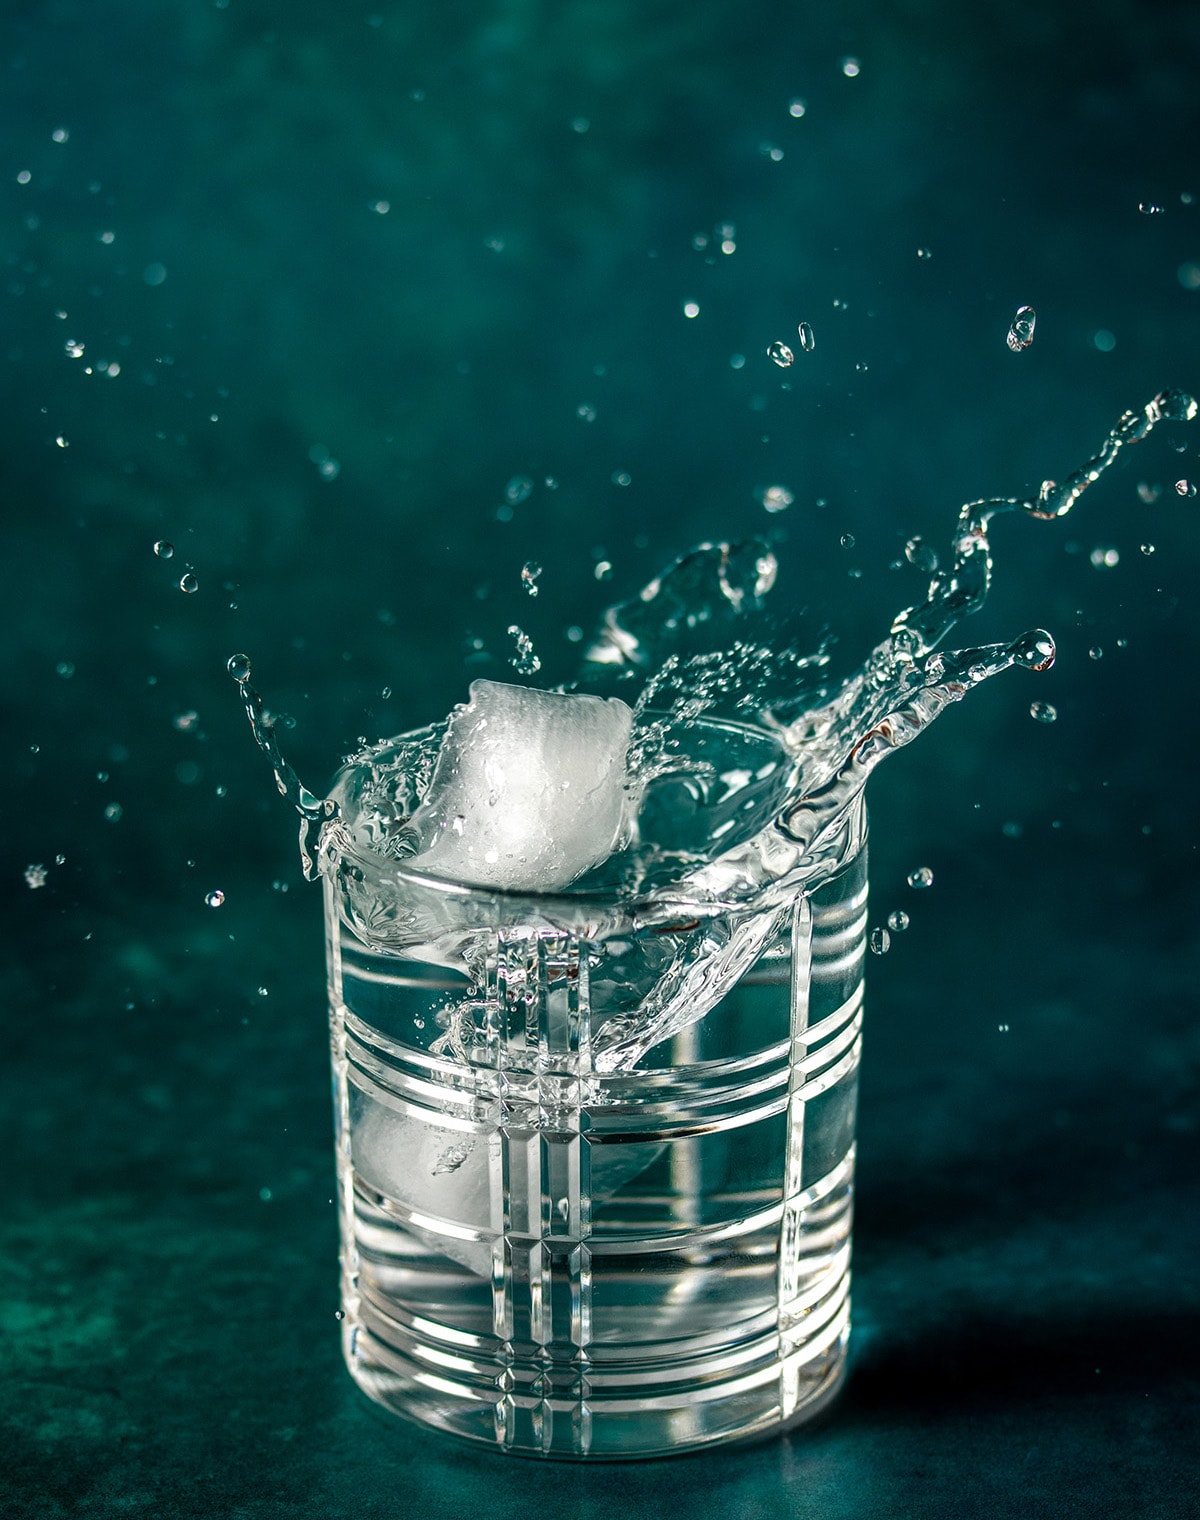 A piece of ice splashing into a glass of water with a green background.